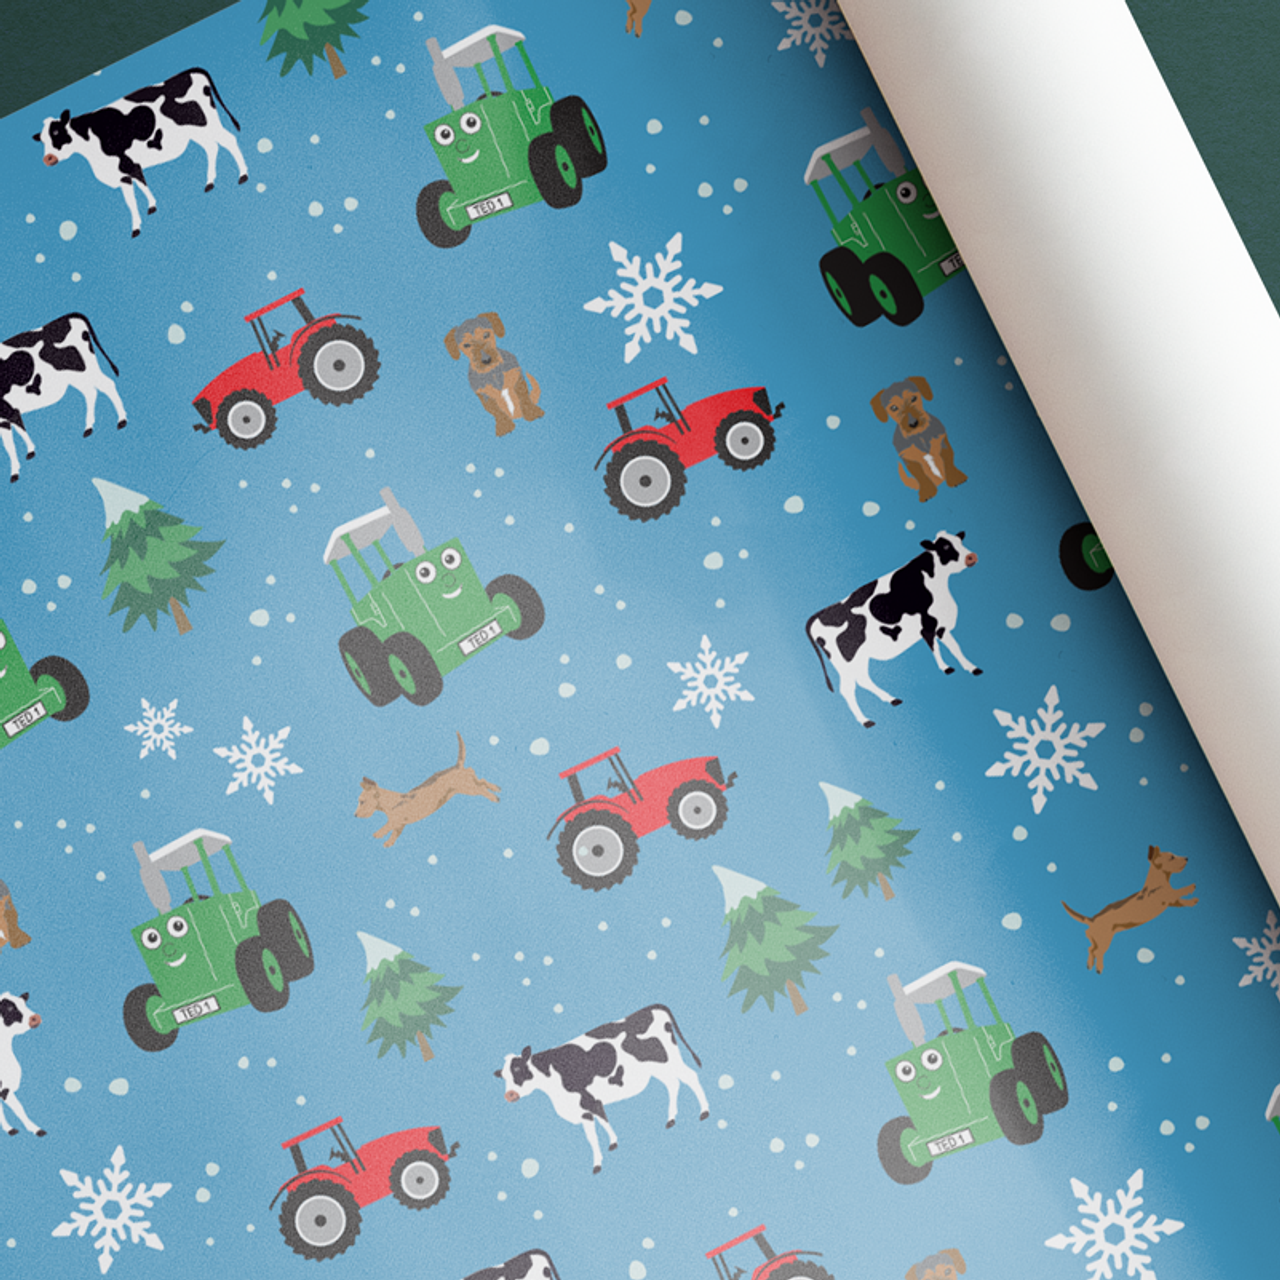 Paper Farm + Eco Kraft Wrapping Paper Roll – Biodegradable